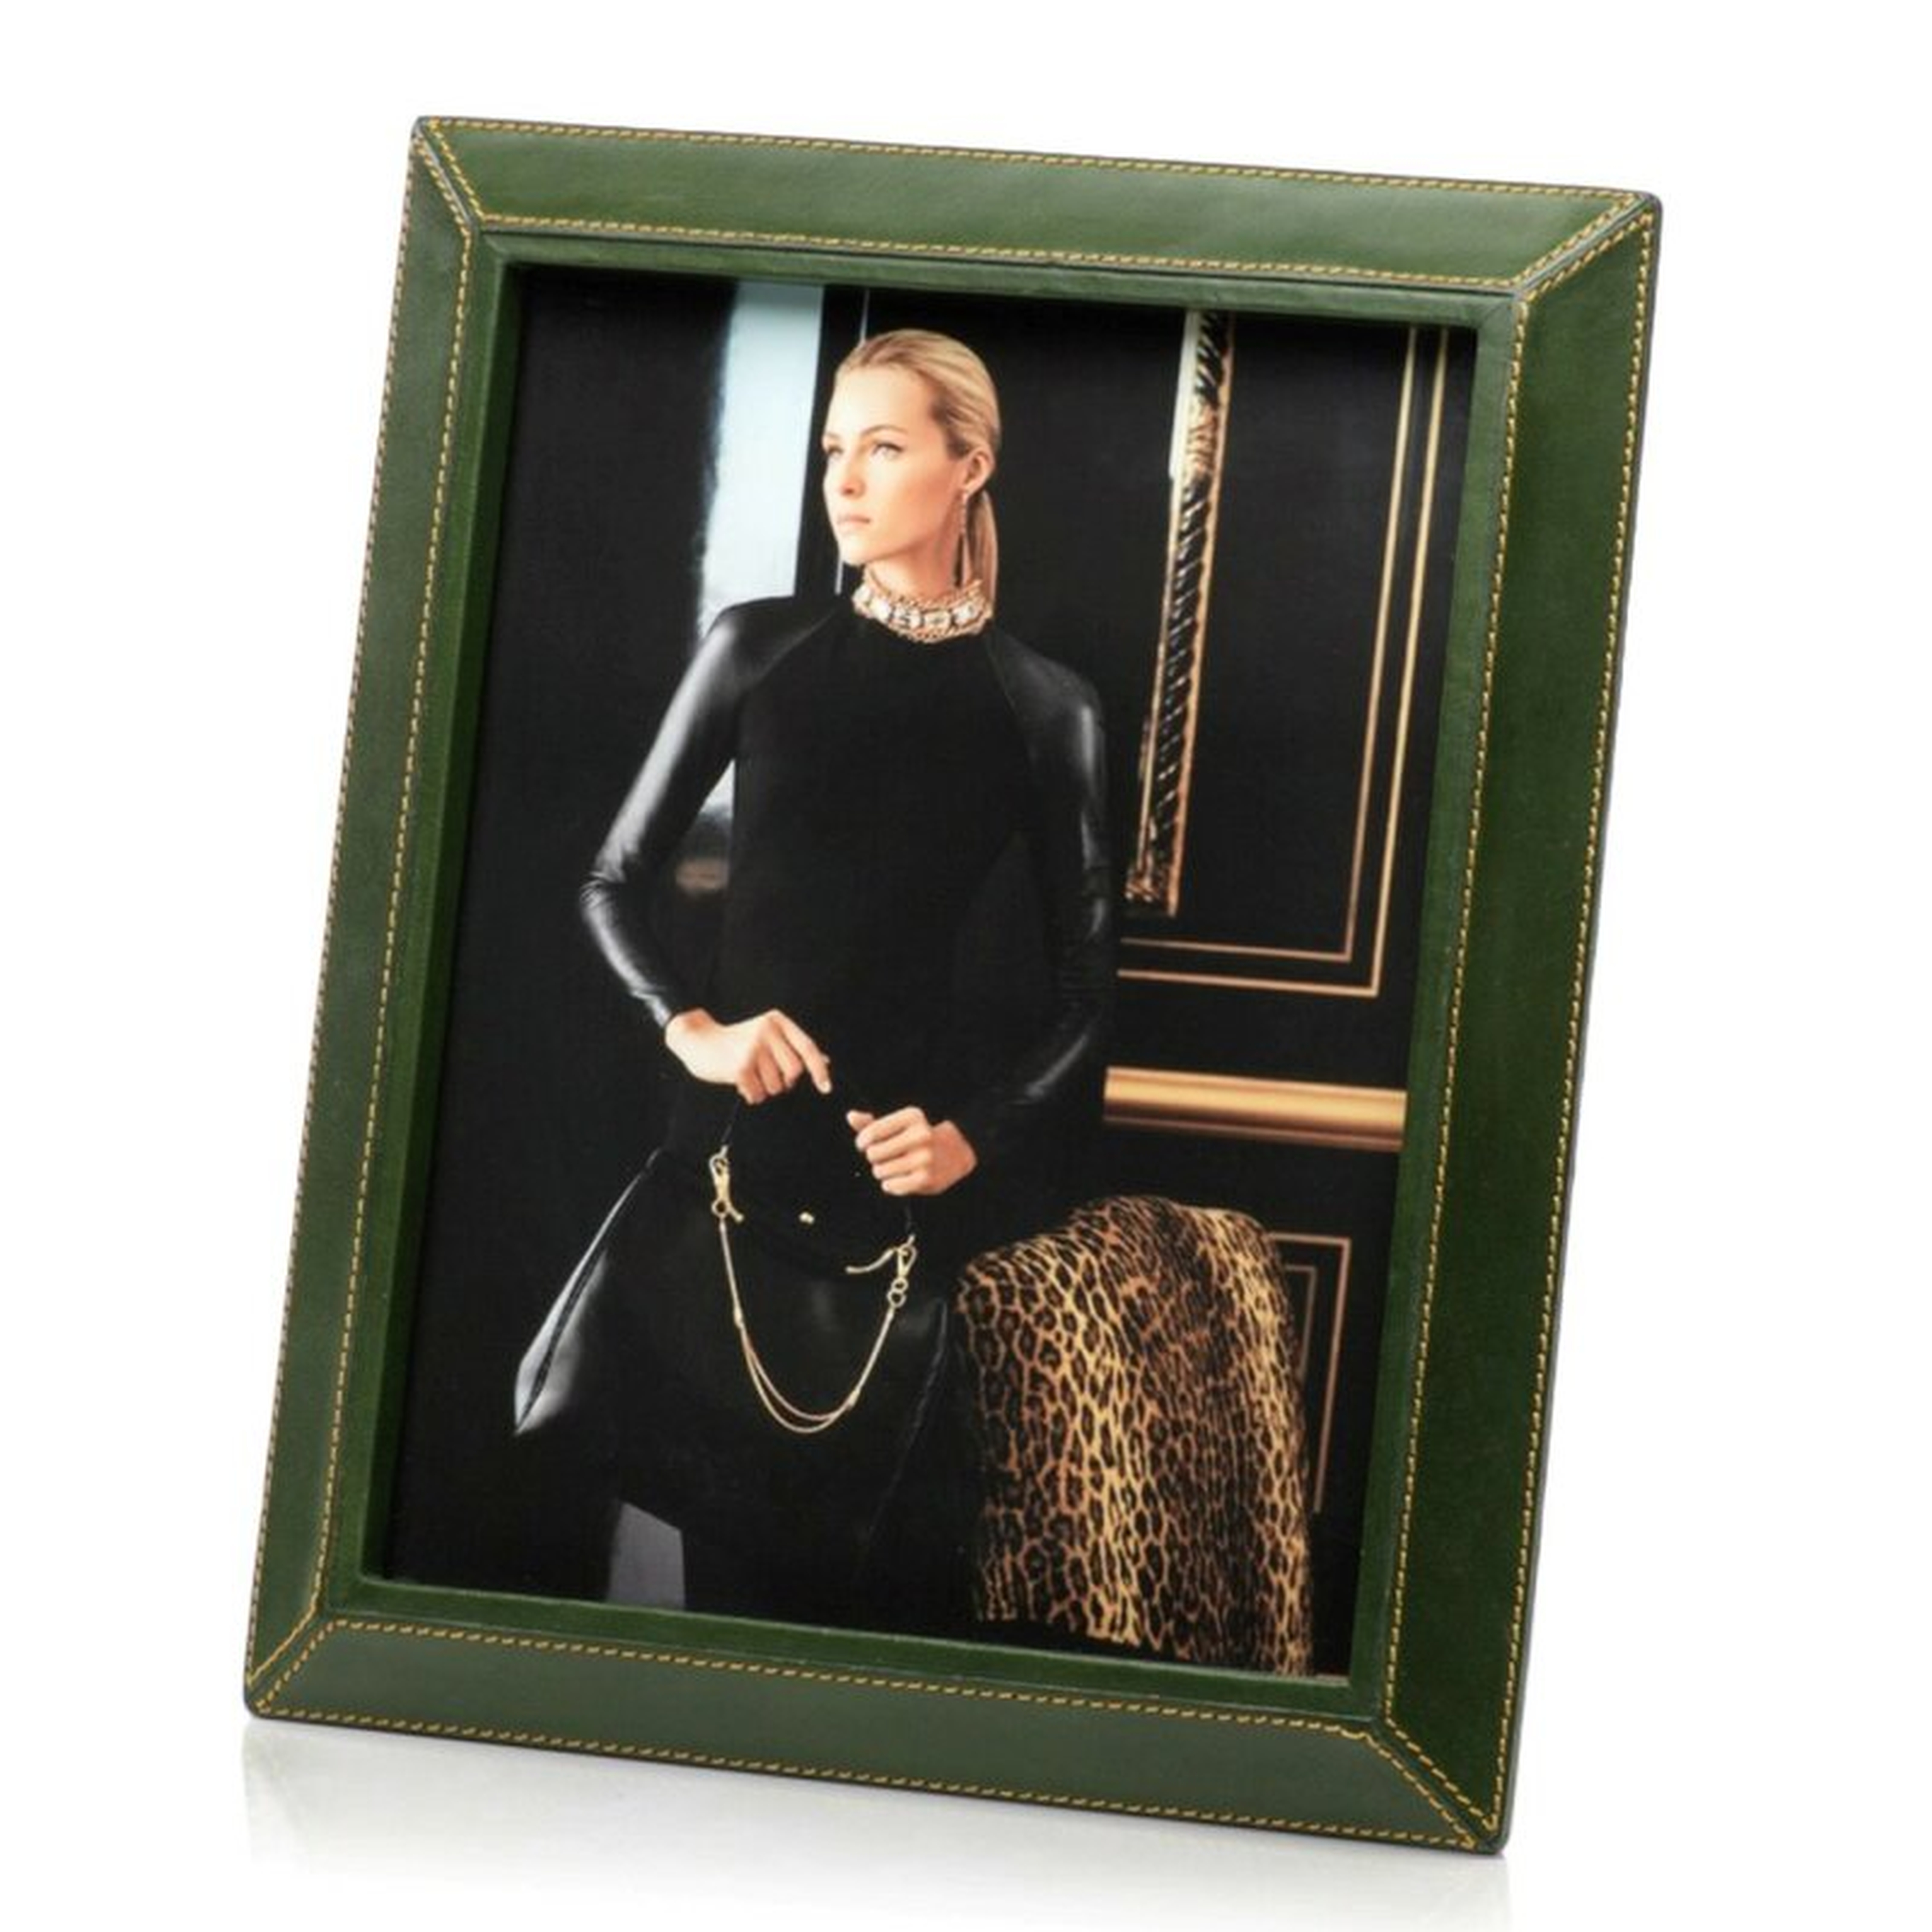 8" x 10" Green Steger Leather Picture Frame - Wayfair